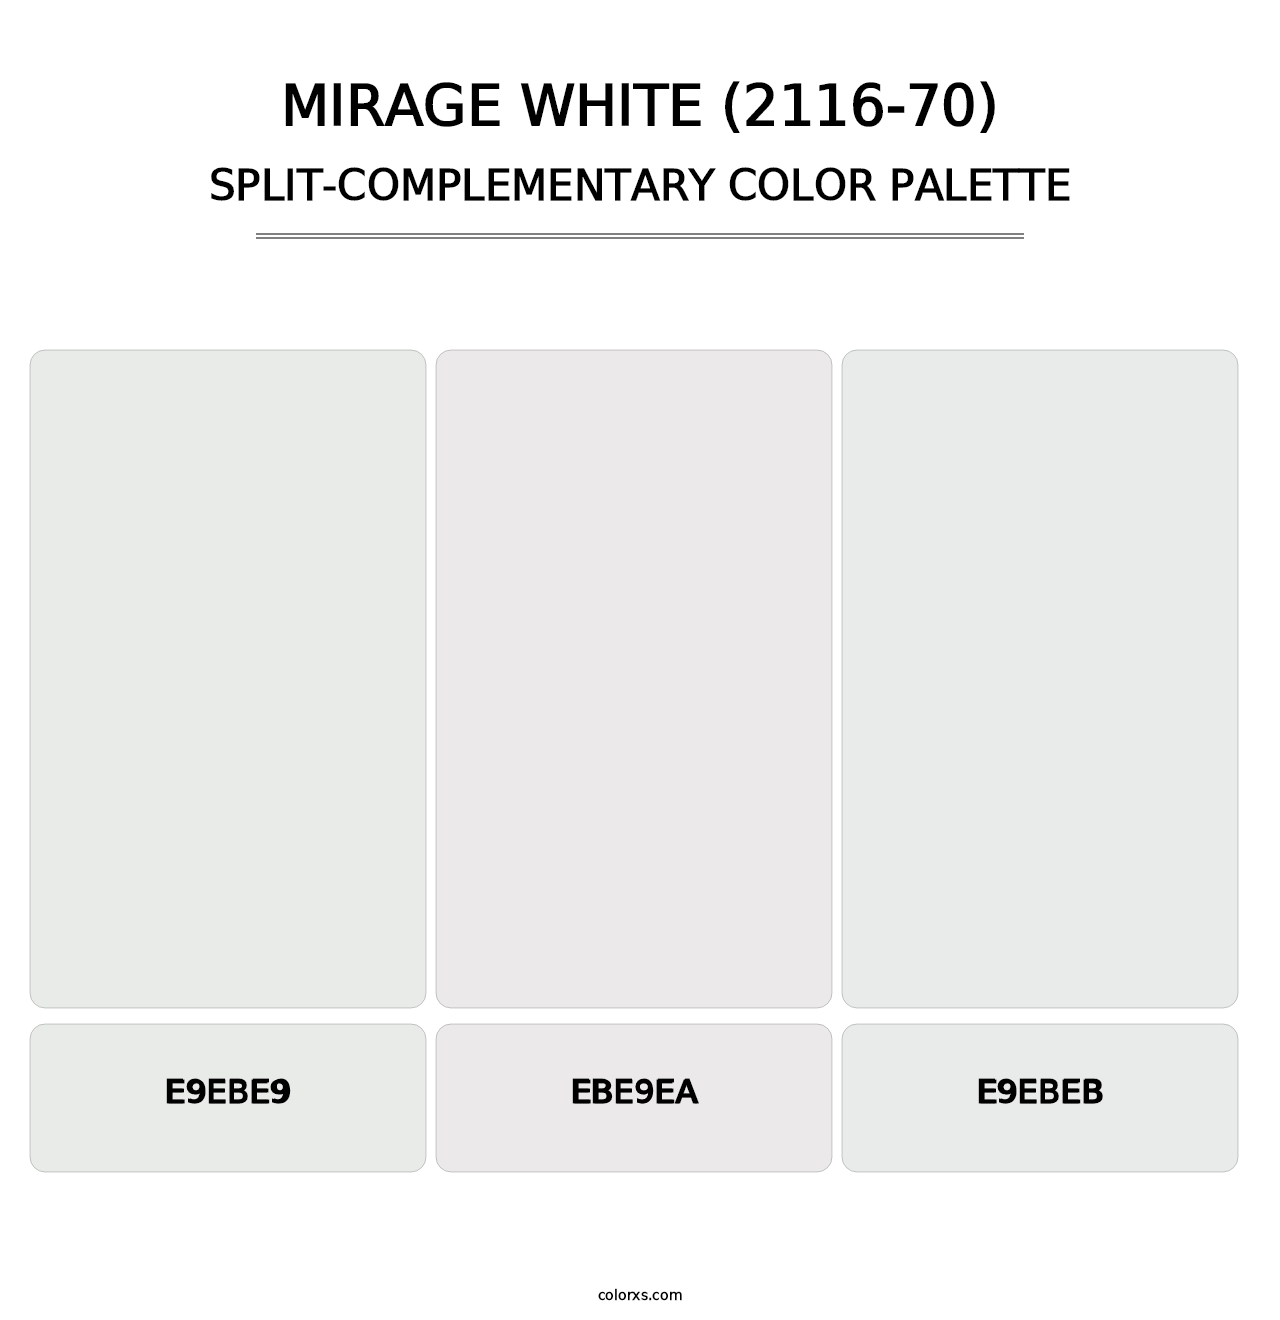 Mirage White (2116-70) - Split-Complementary Color Palette